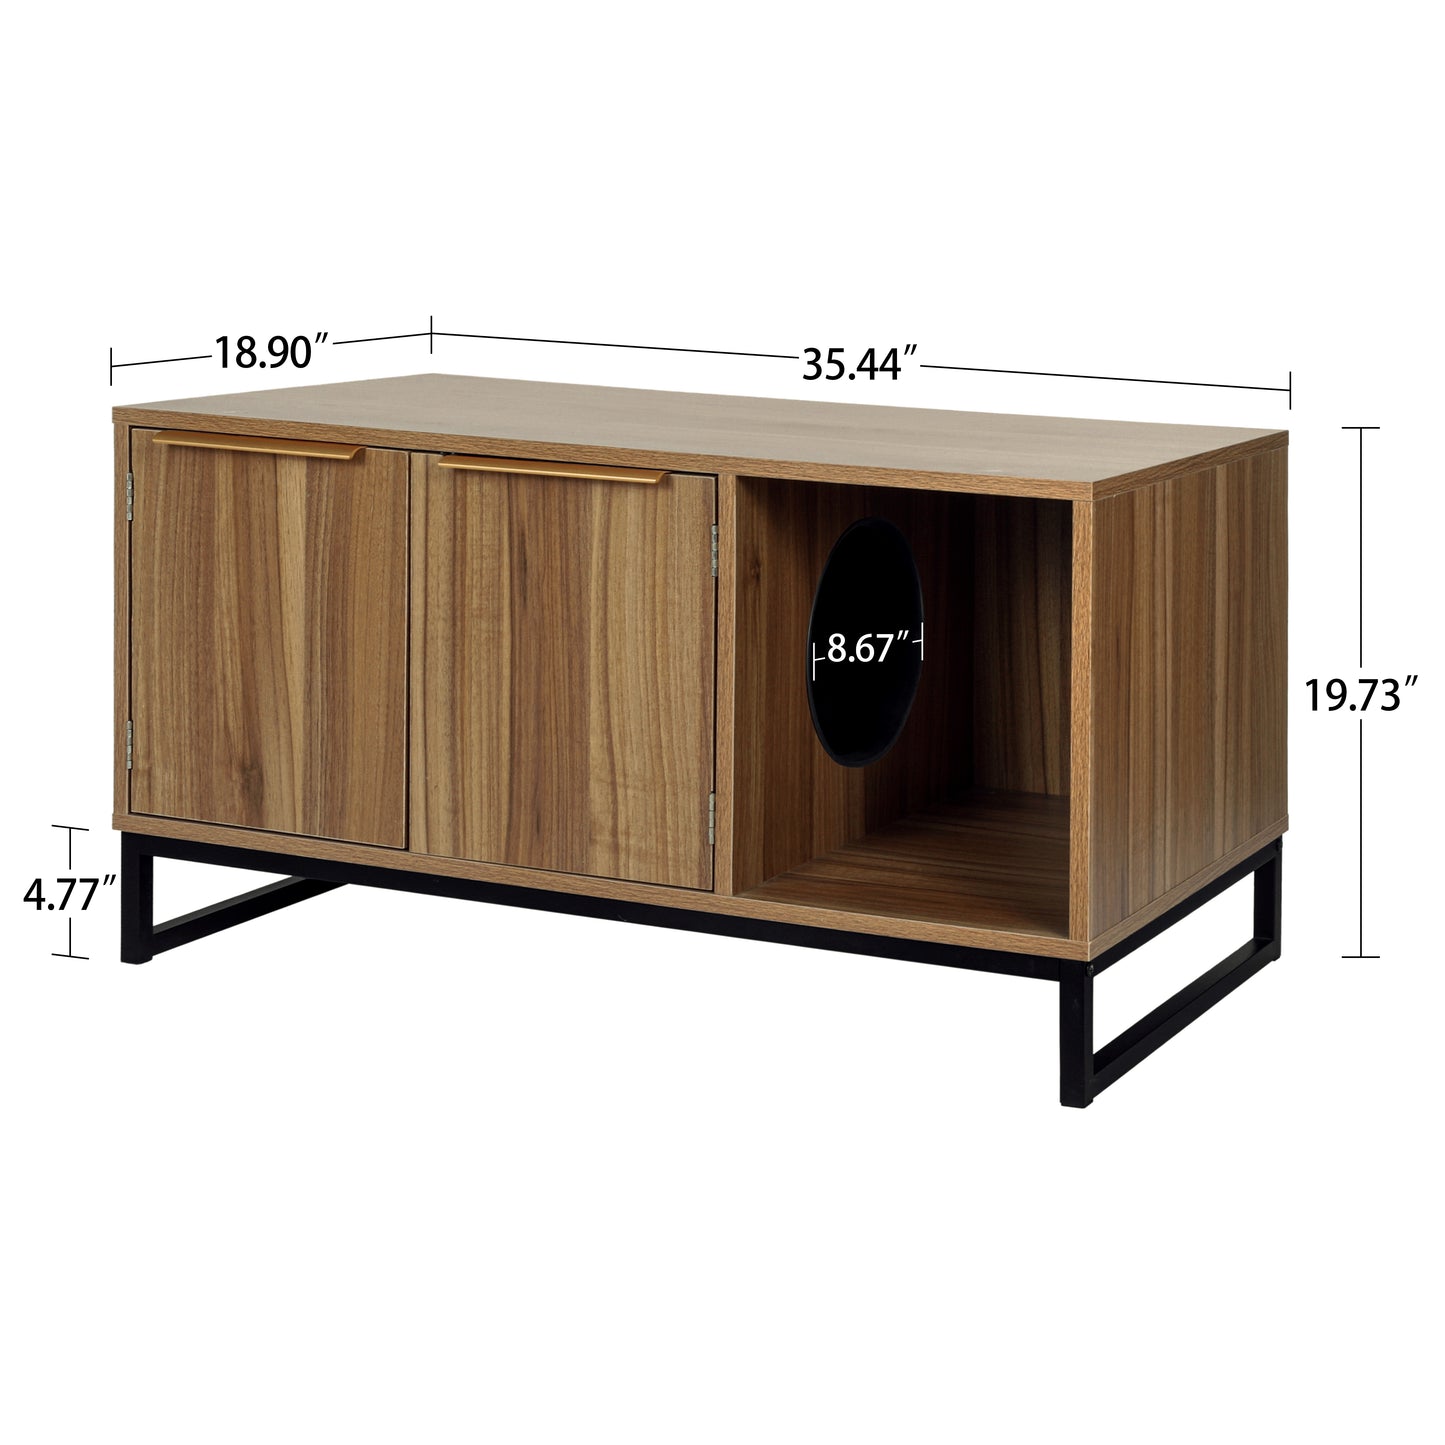 TV Stand + Pet House In-One, Waterproof/Scratch Resistant